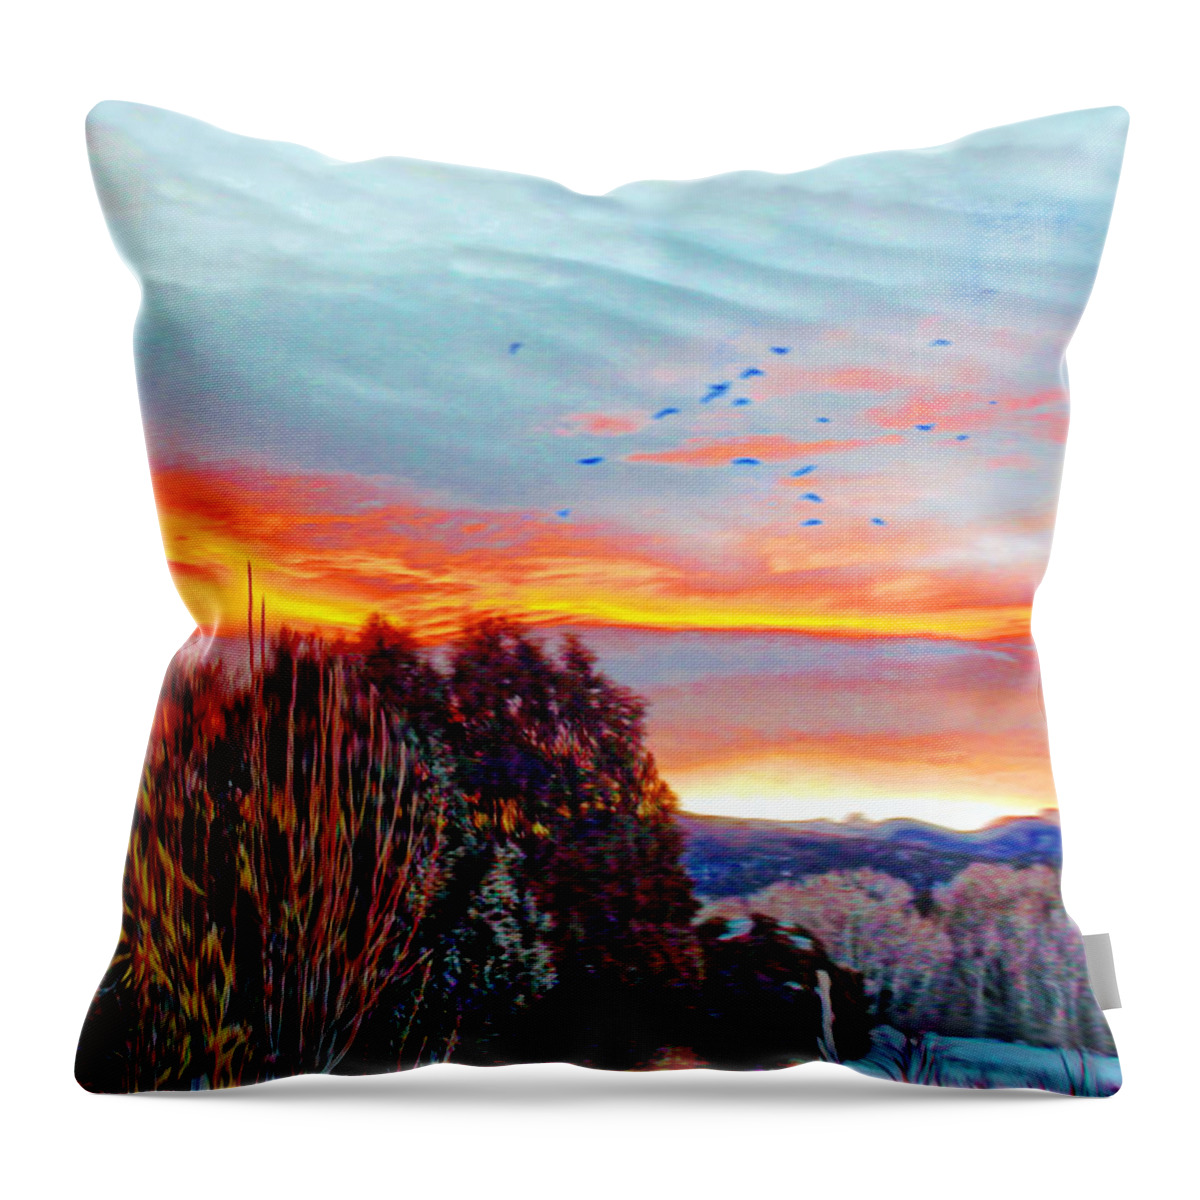 Winter Scene Throw Pillow featuring the photograph Crows Before Dawn El Valle New Mexico by Anastasia Savage Ealy